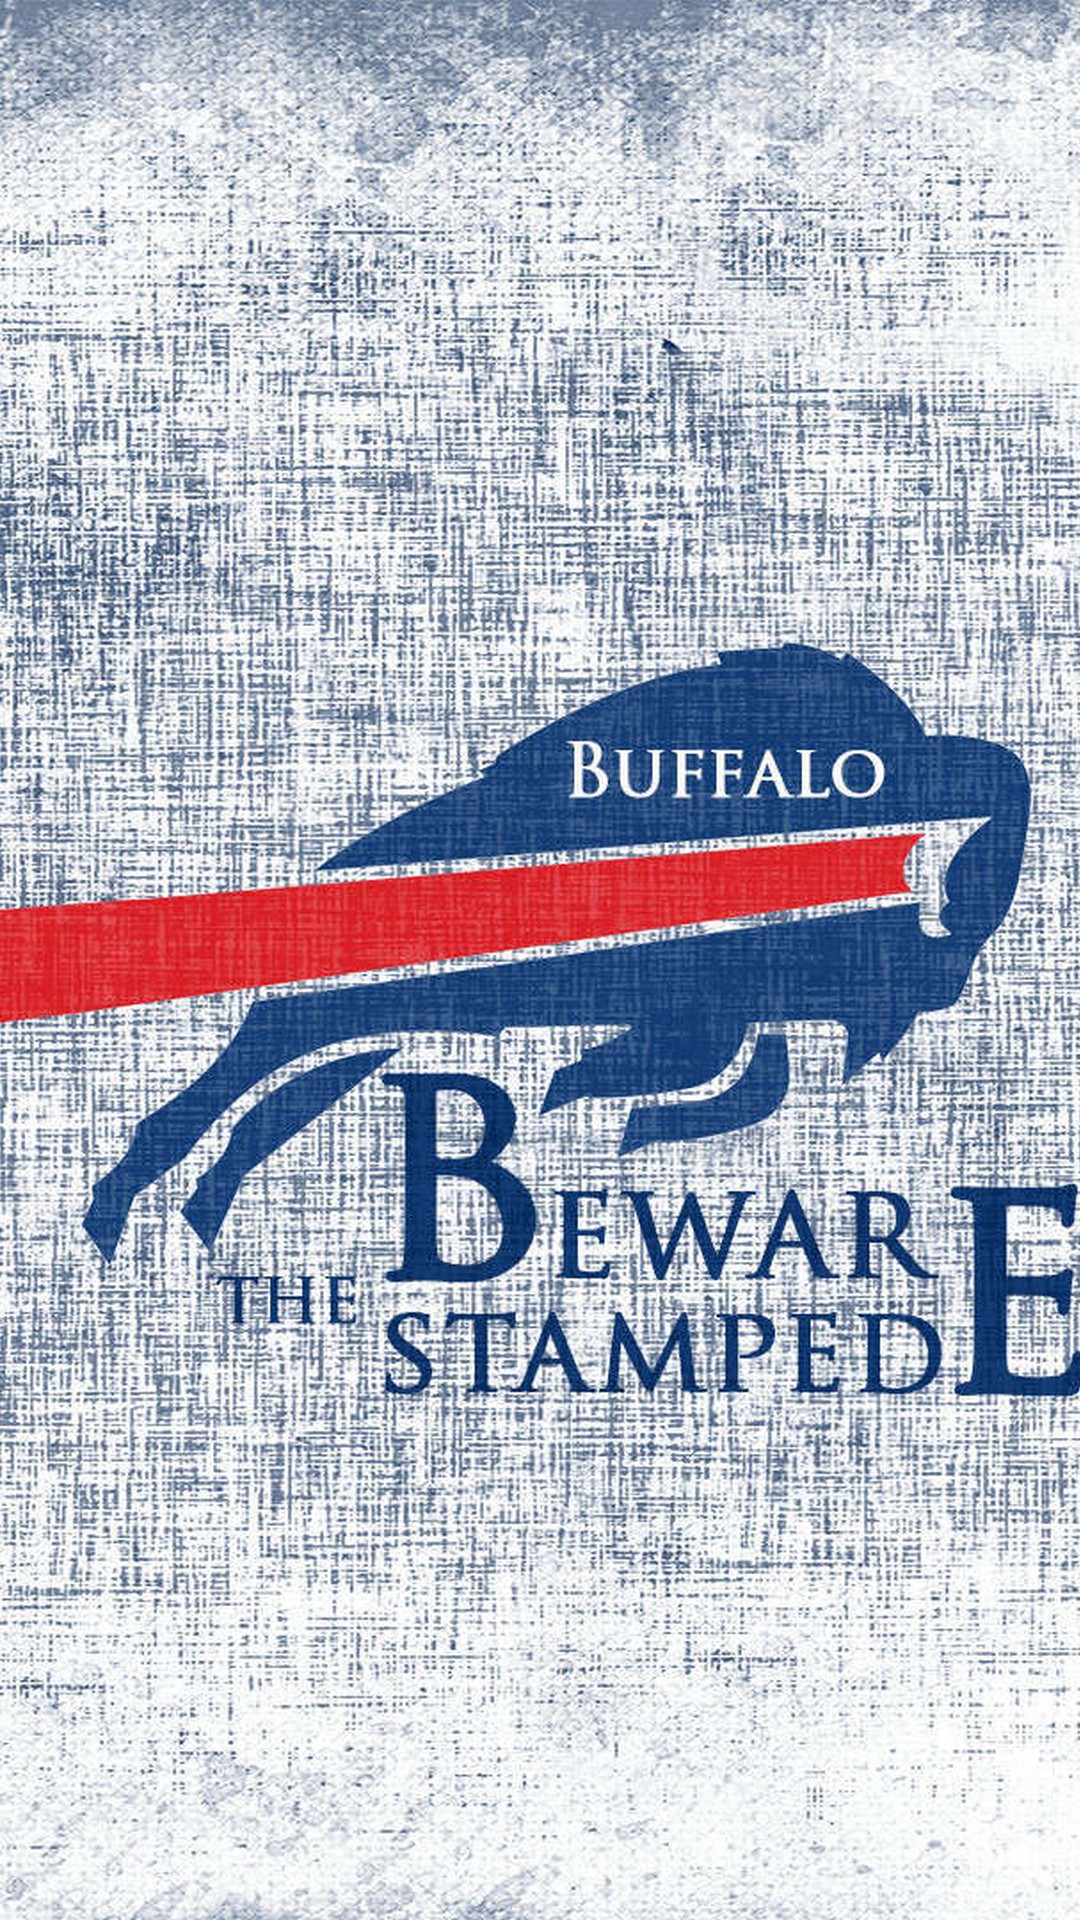 Buffalo Bills iPhone Wallpaper in HD with high-resolution 1080x1920 pixel. Download and set as wallpaper for Apple iPhone X, XS Max, XR, 8, 7, 6, SE, iPad, Android